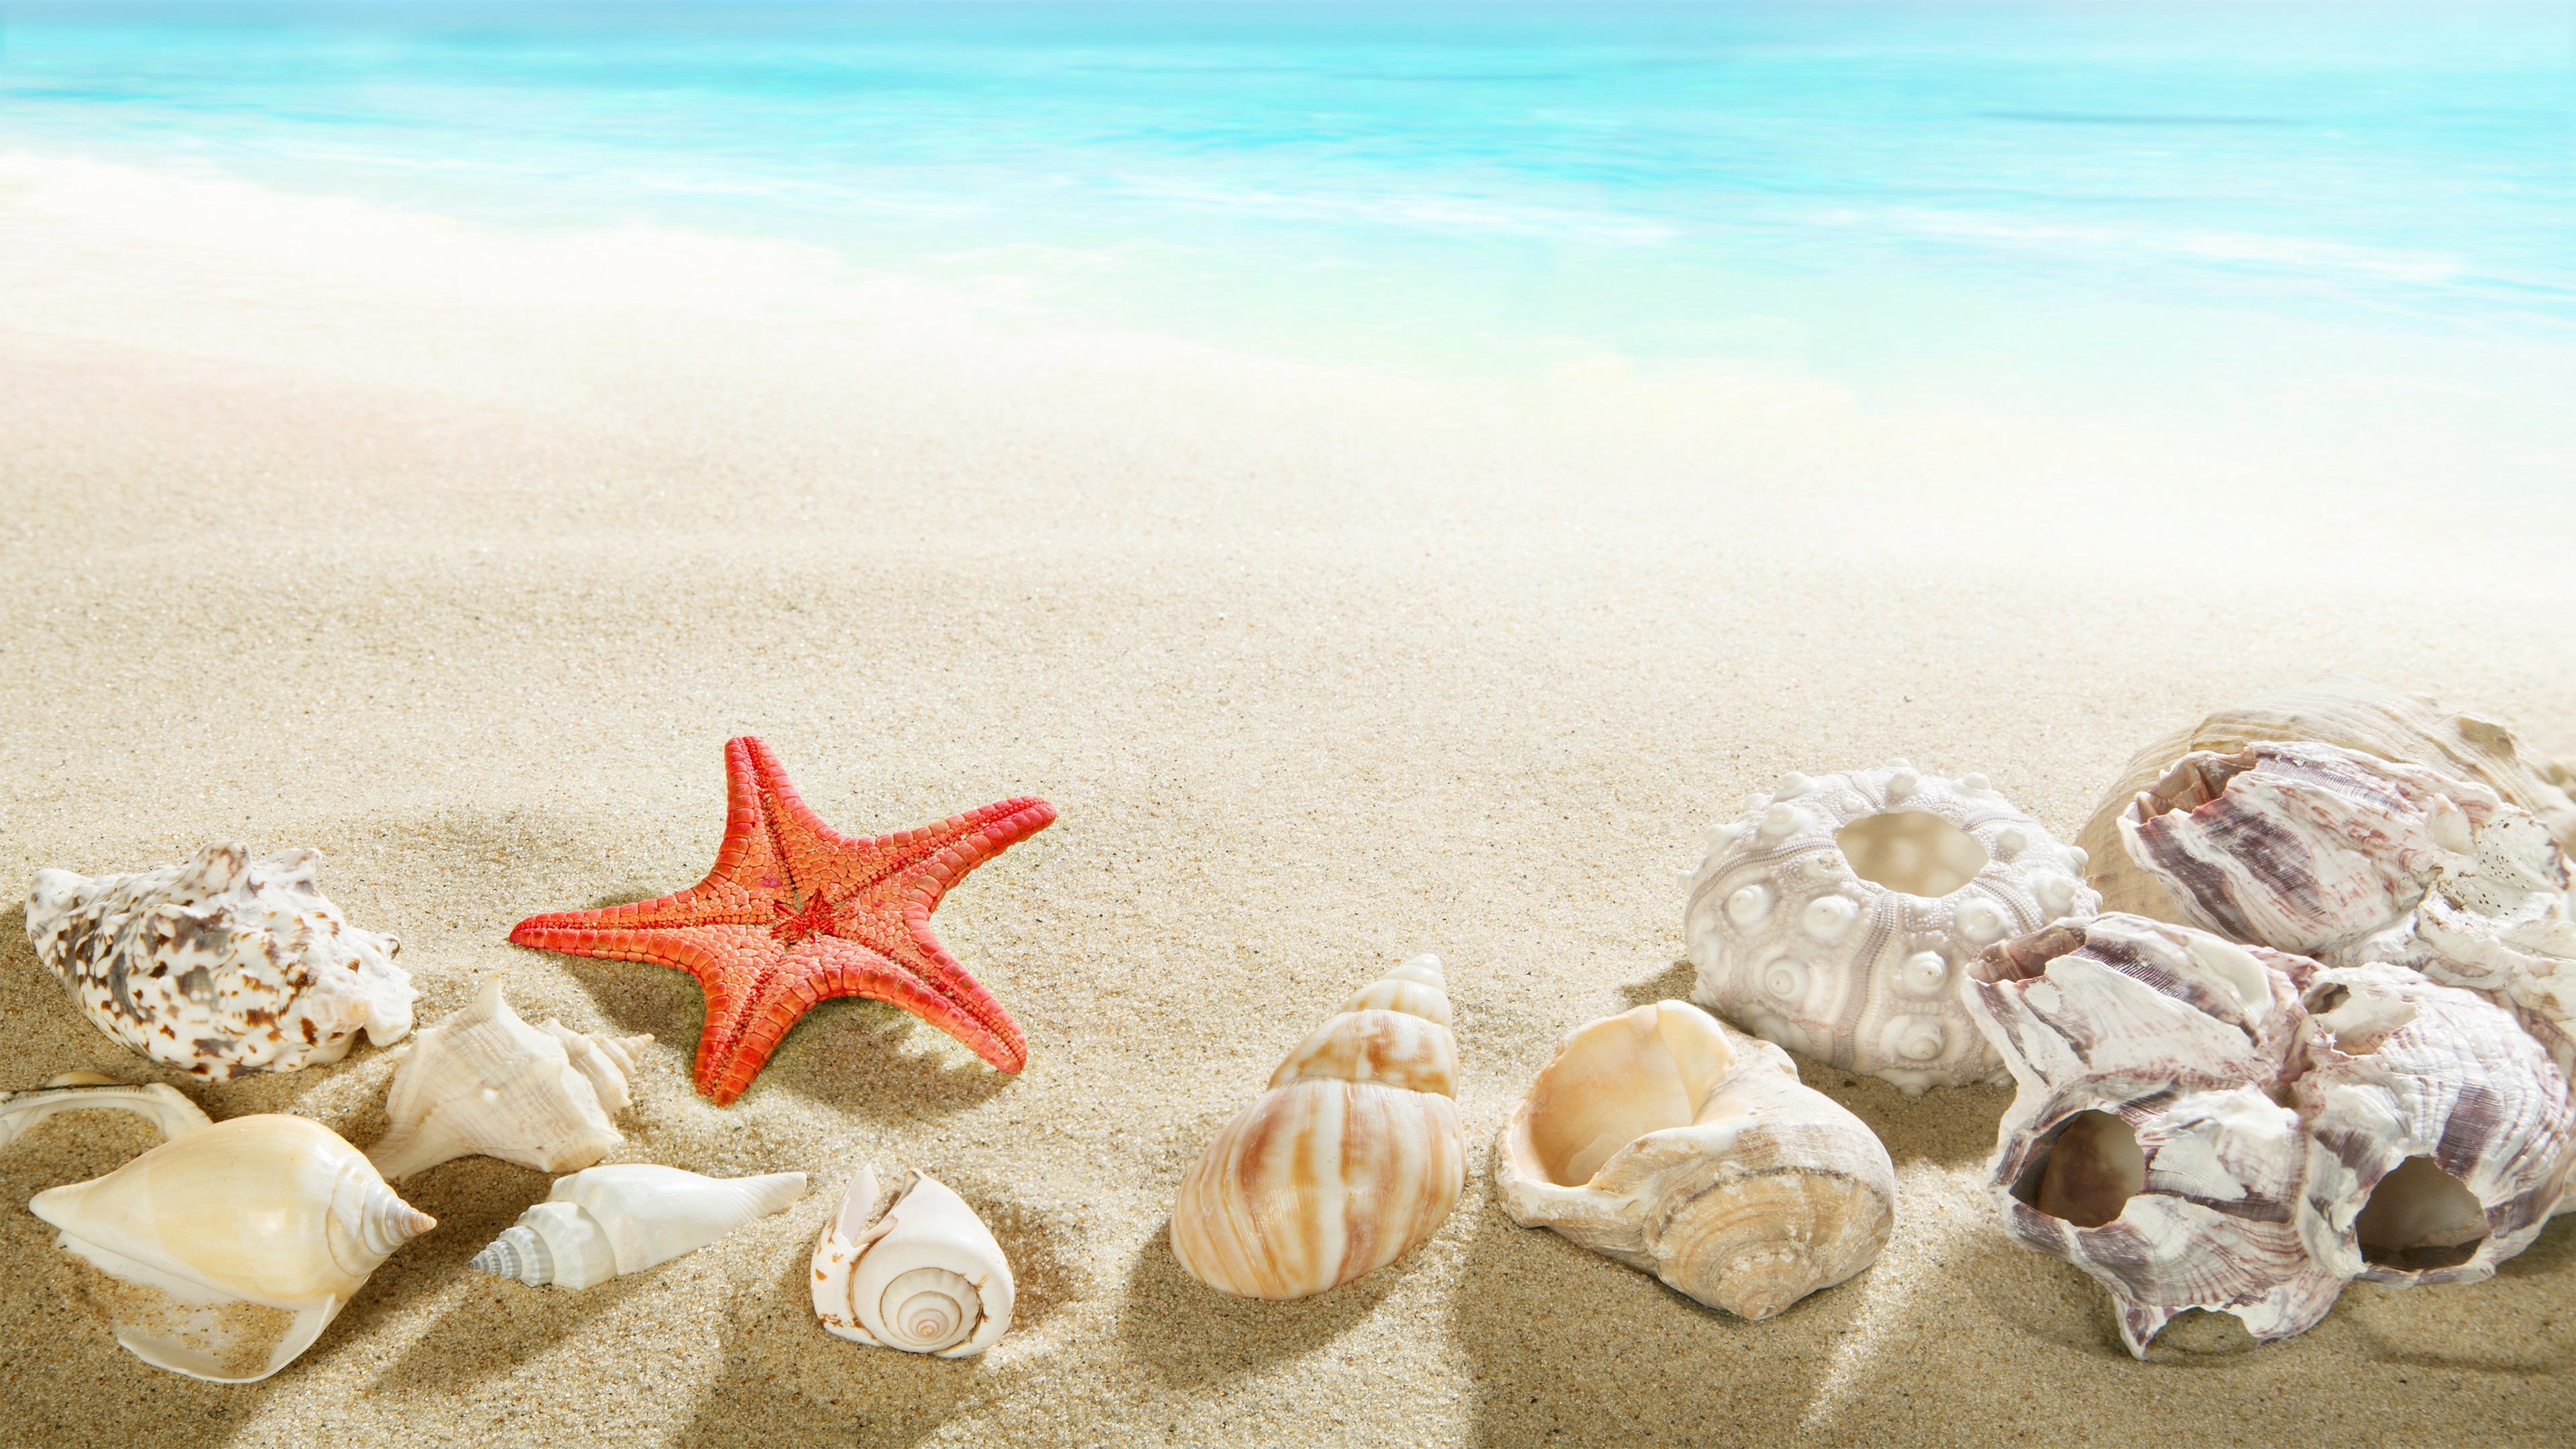 Sea Shell: Starfish, Outer layer created by an animal that lives in the sea. 3840x2160 4K Wallpaper.